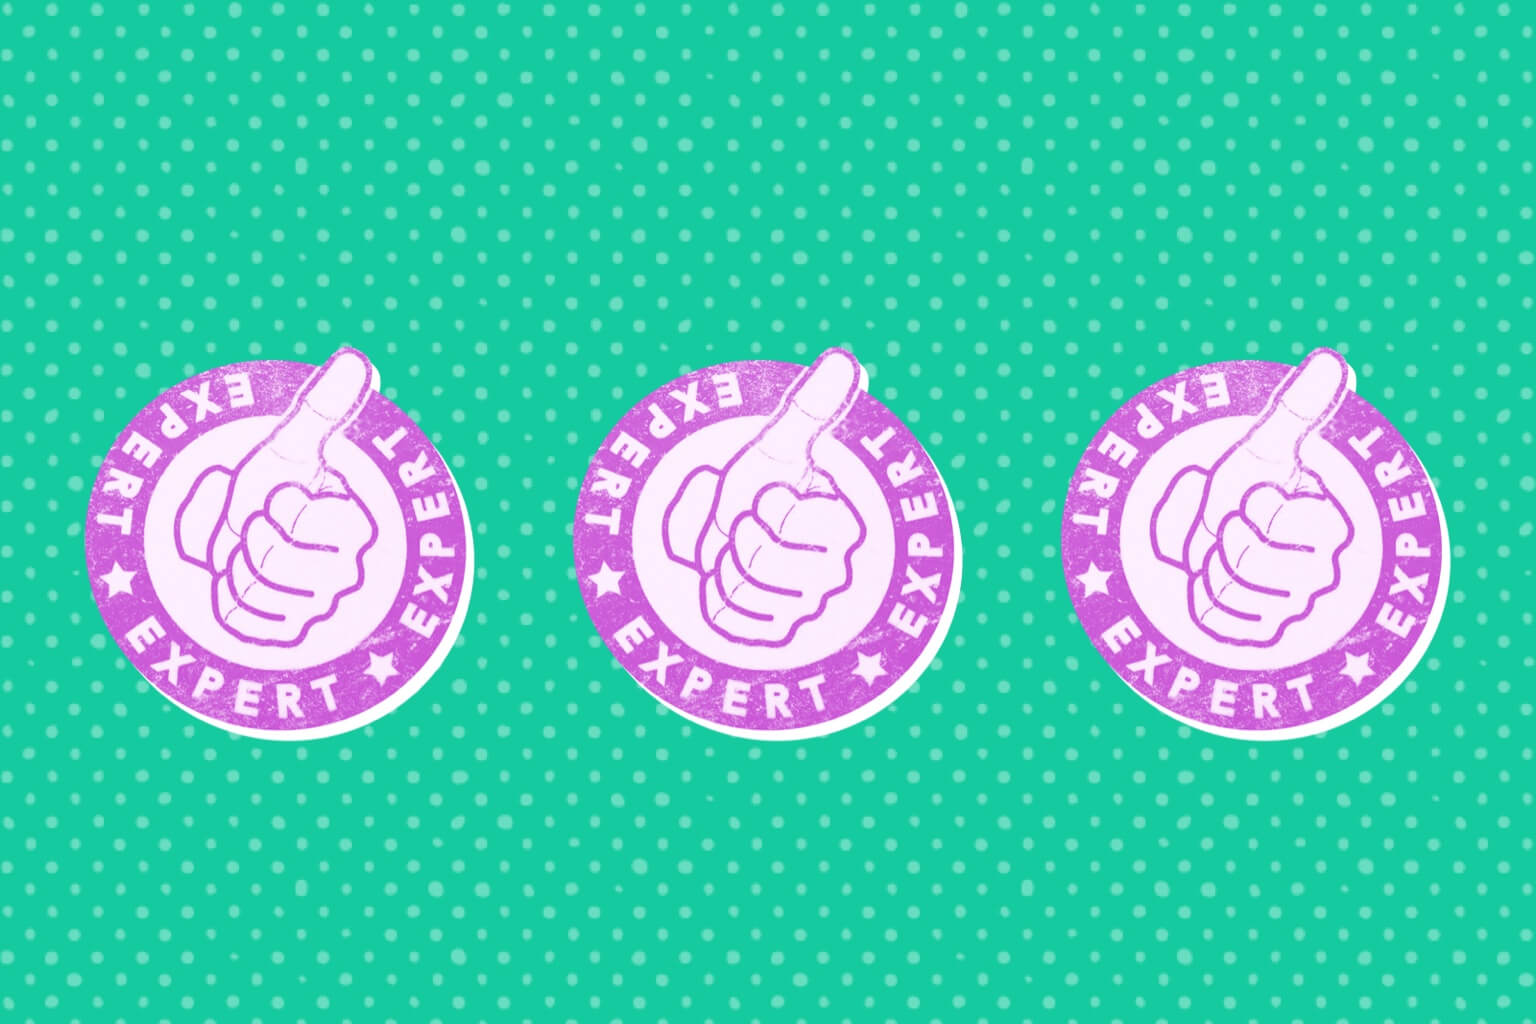 Three purple badge illustrations showing a thumbs up with the word 'expert' encircling it on a green background.